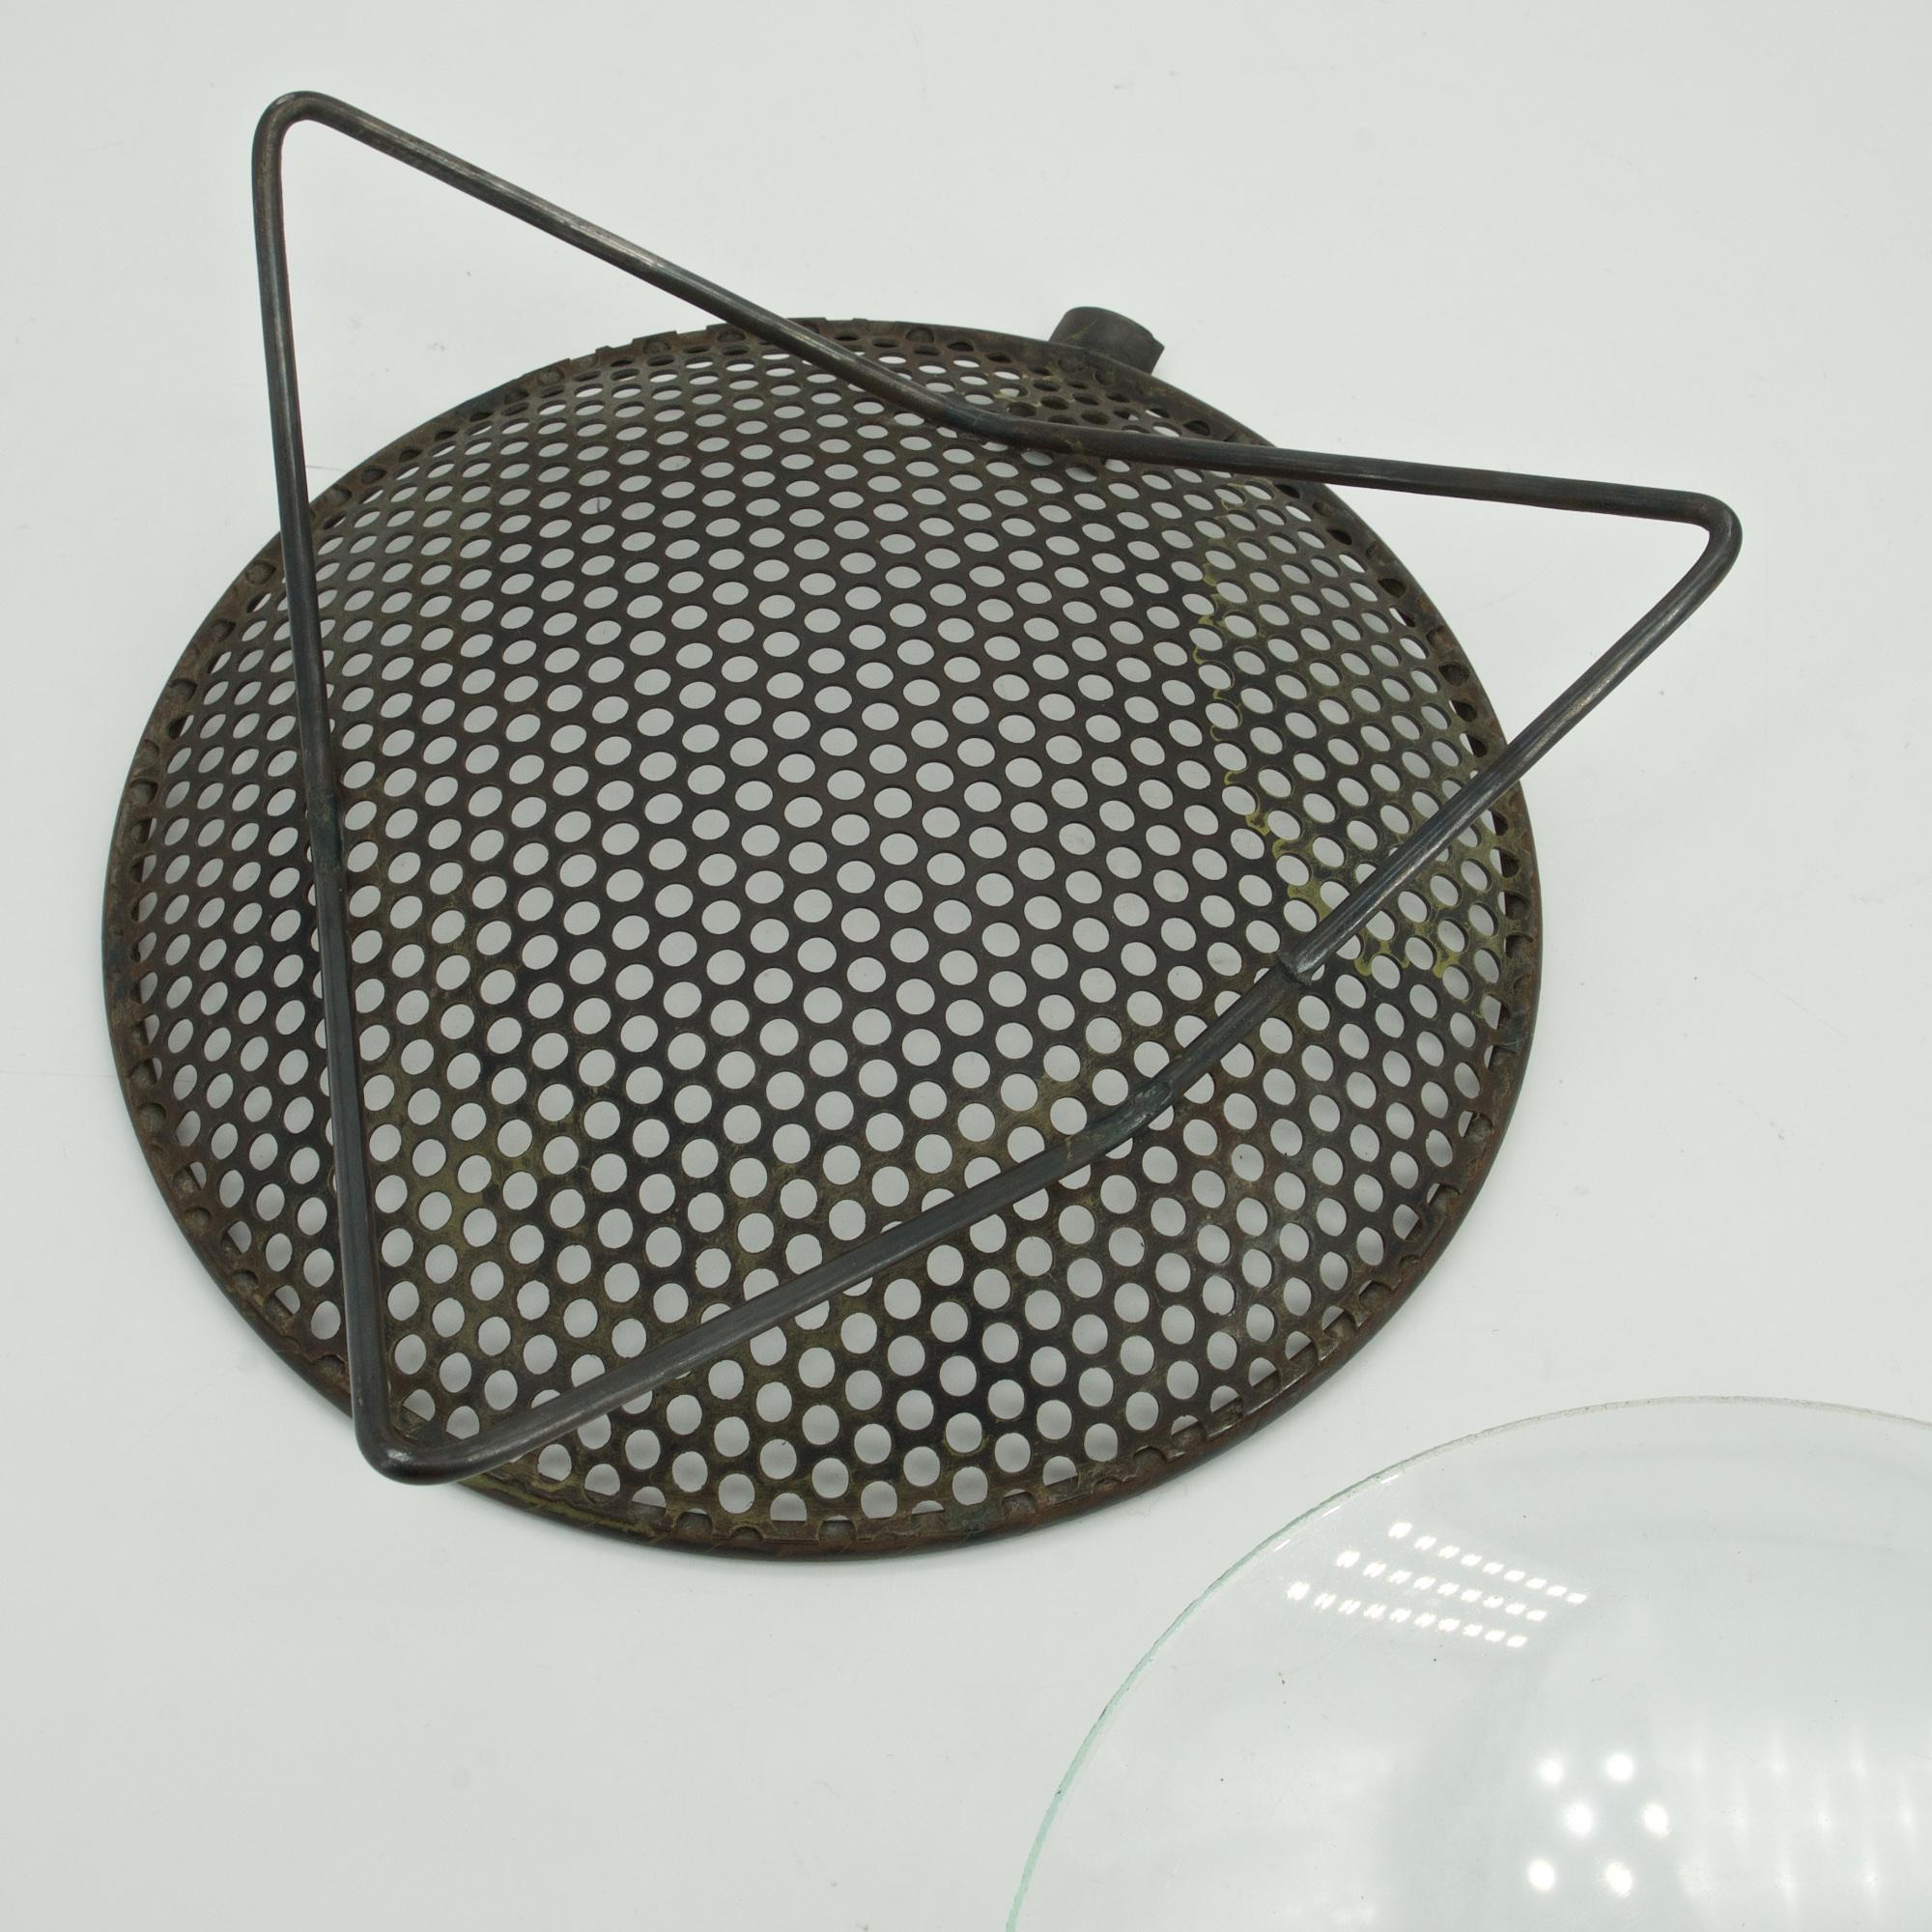 1950s Perforated Metal Atomic Dish Ashtray Nº S30 by Richard Galef Ravenware For Sale 1